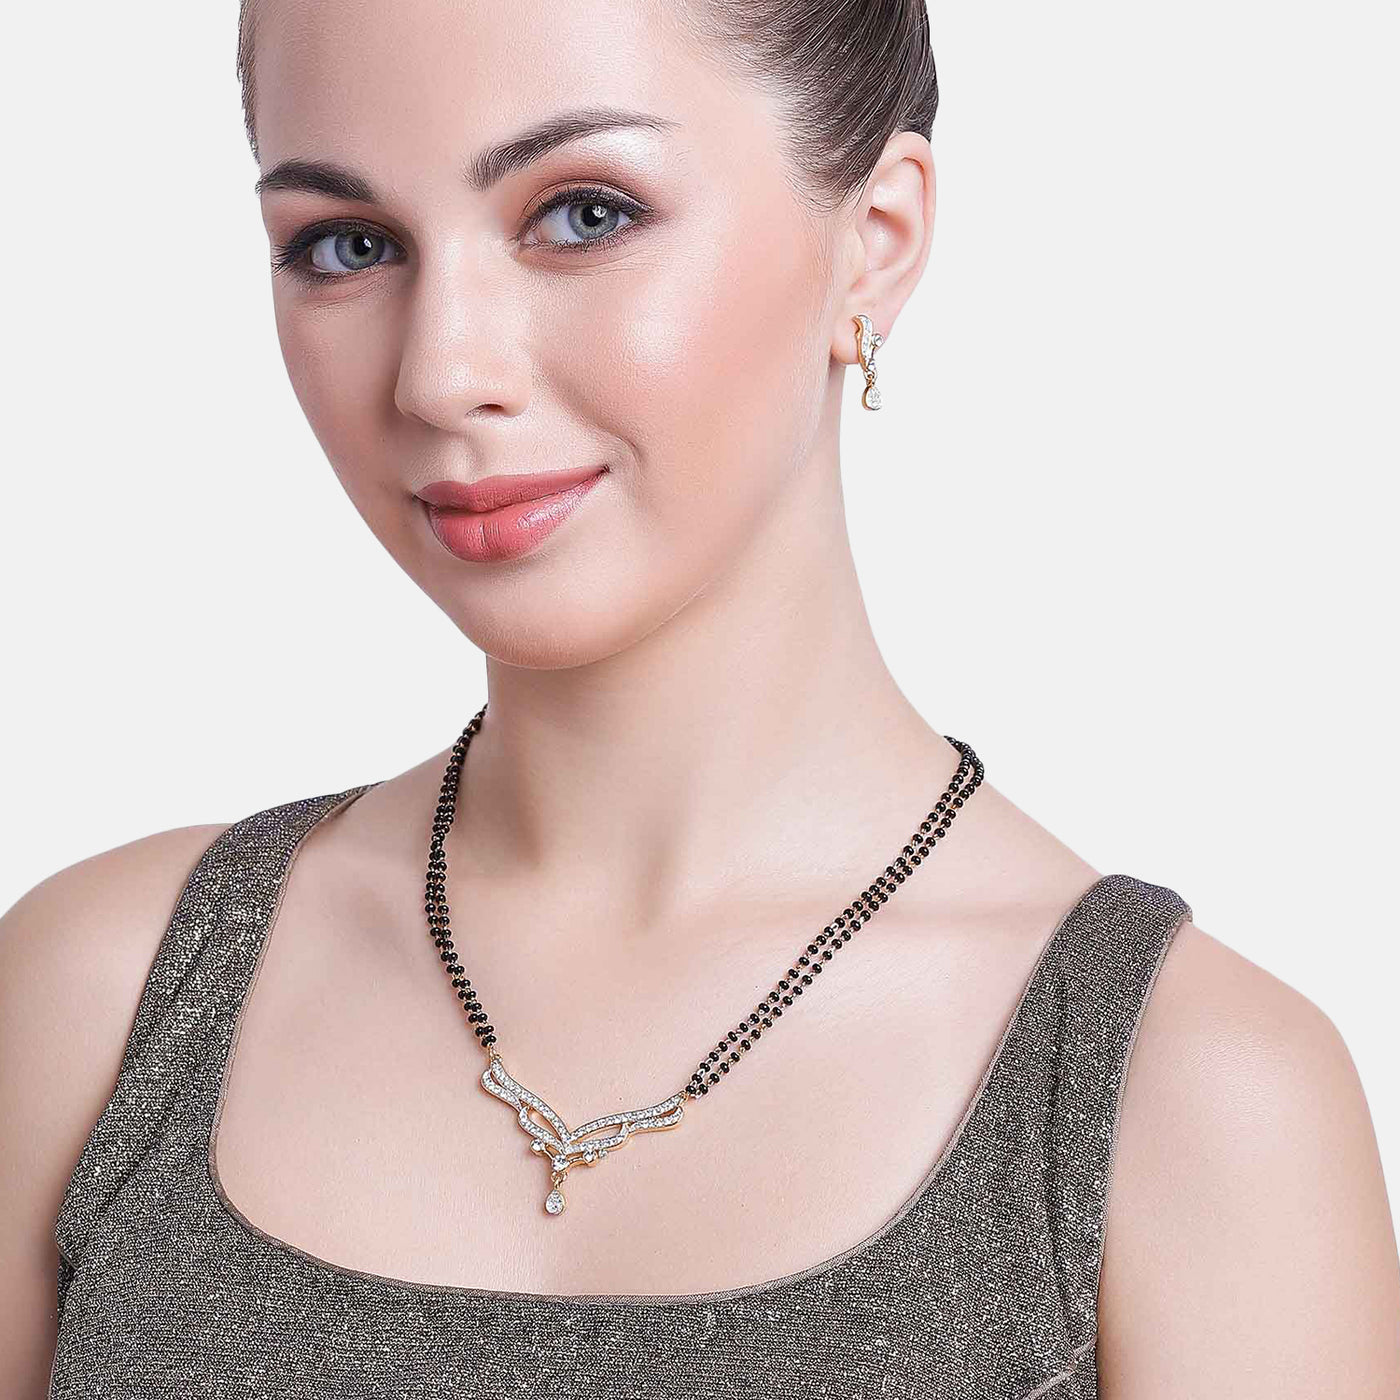 Estele Gold Plated Glaze Drop Mangalsutra Necklace Set with Austrian Crystals for Women